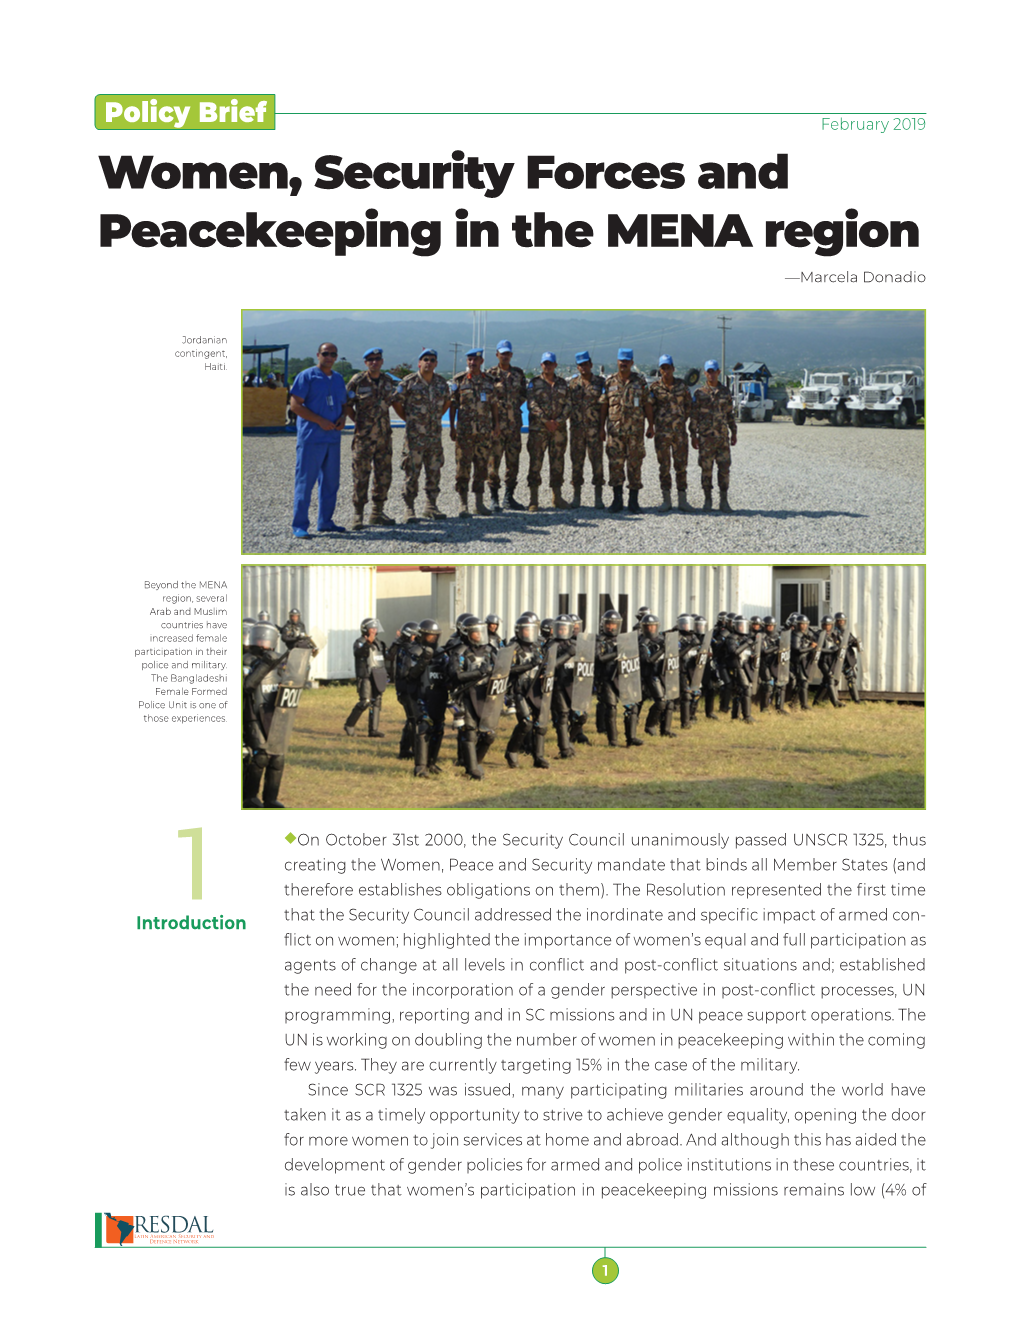 Women, Security Forces and Peacekeeping in the MENA Region —Marcela Donadio